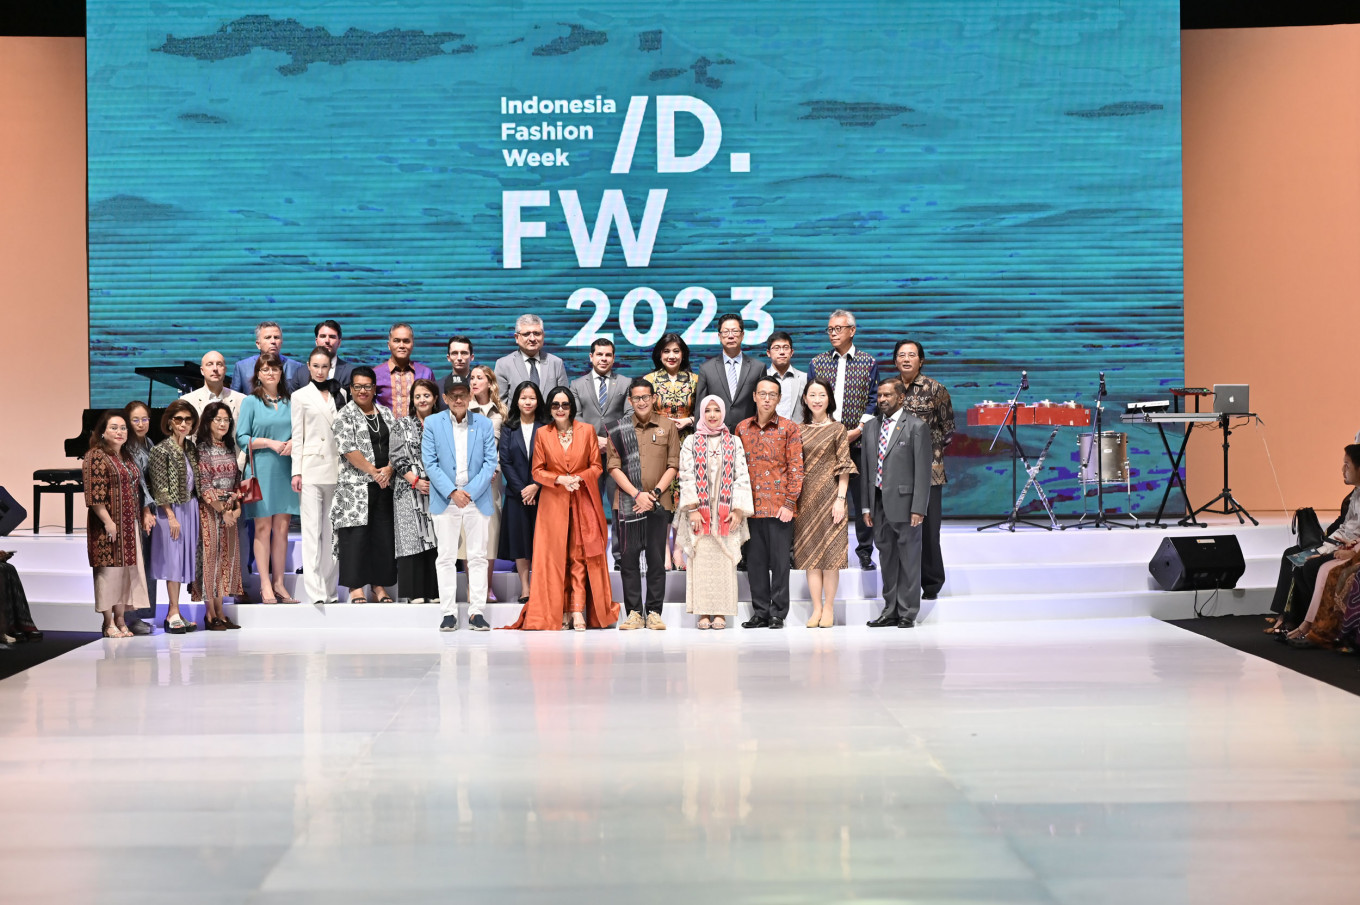 Indonesia Fashion Week 2023 highlights Gorontalo culture, textiles in 10th edition